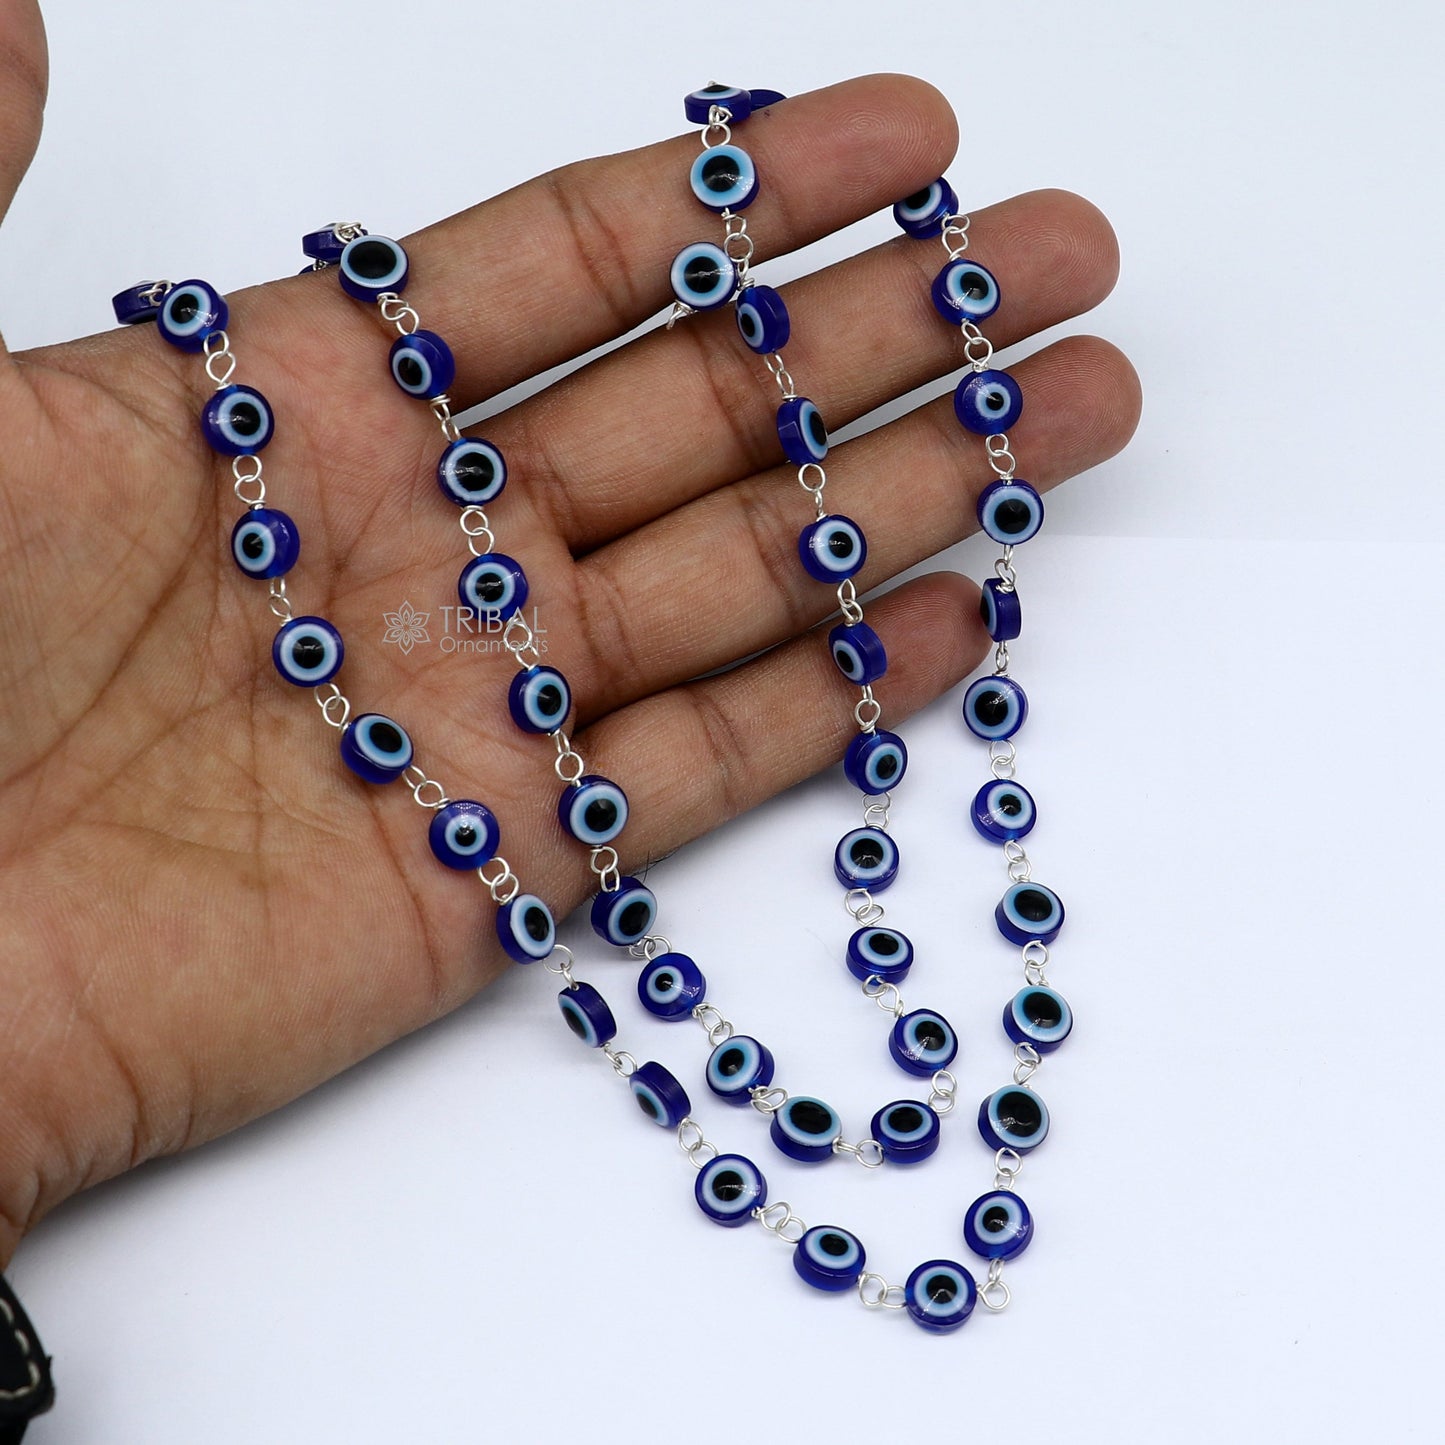 18 to 30 inches all sizes evil eyes beads handmade necklace chain 925 silver chain necklace protect from negative energy ch0561 - TRIBAL ORNAMENTS